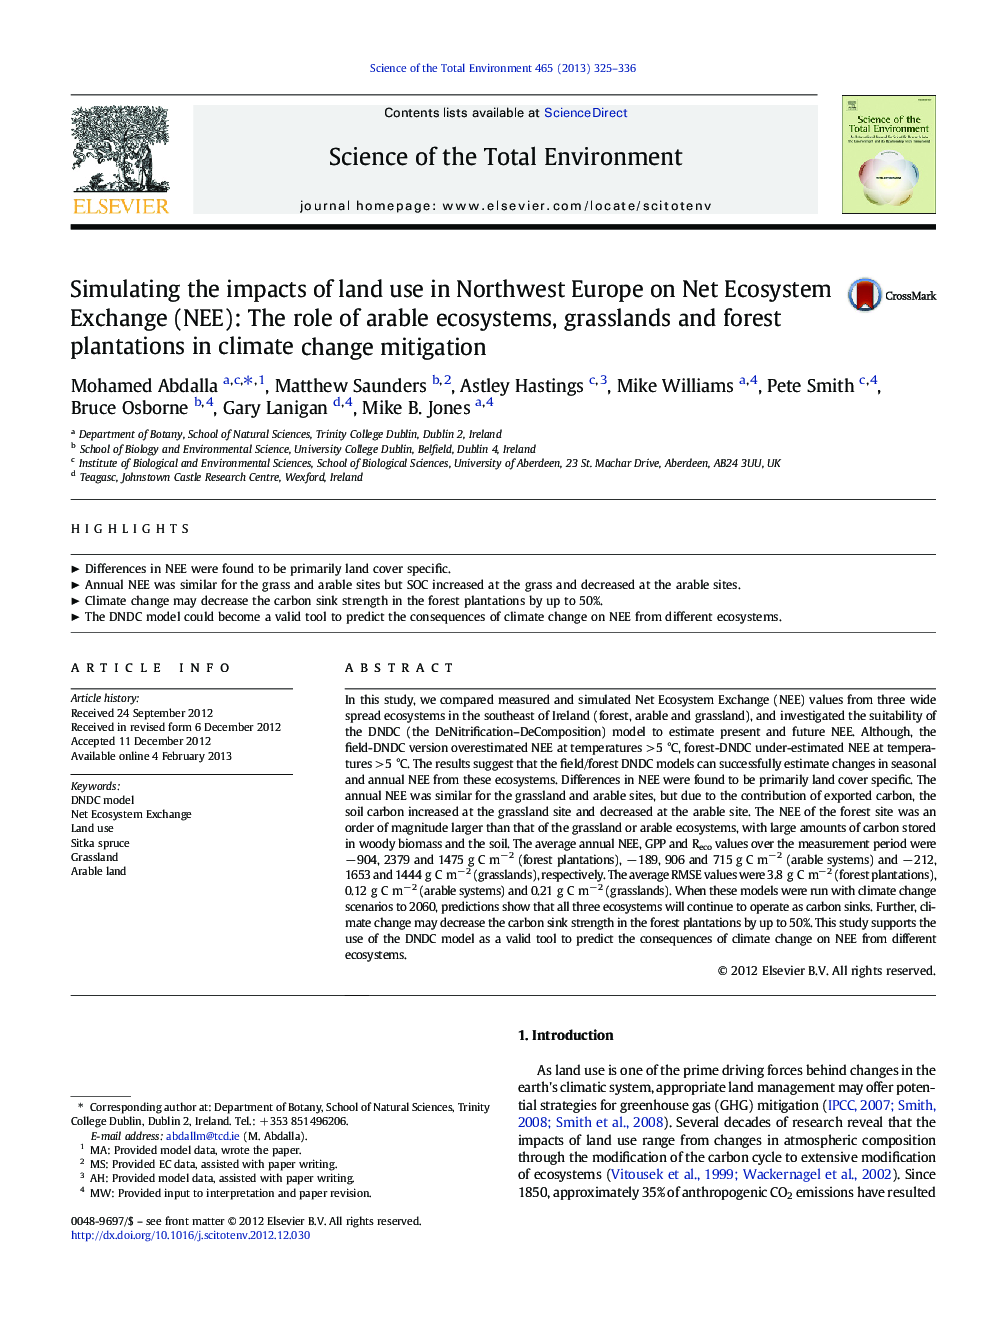 Simulating the impacts of land use in Northwest Europe on Net Ecosystem Exchange (NEE): The role of arable ecosystems, grasslands and forest plantations in climate change mitigation